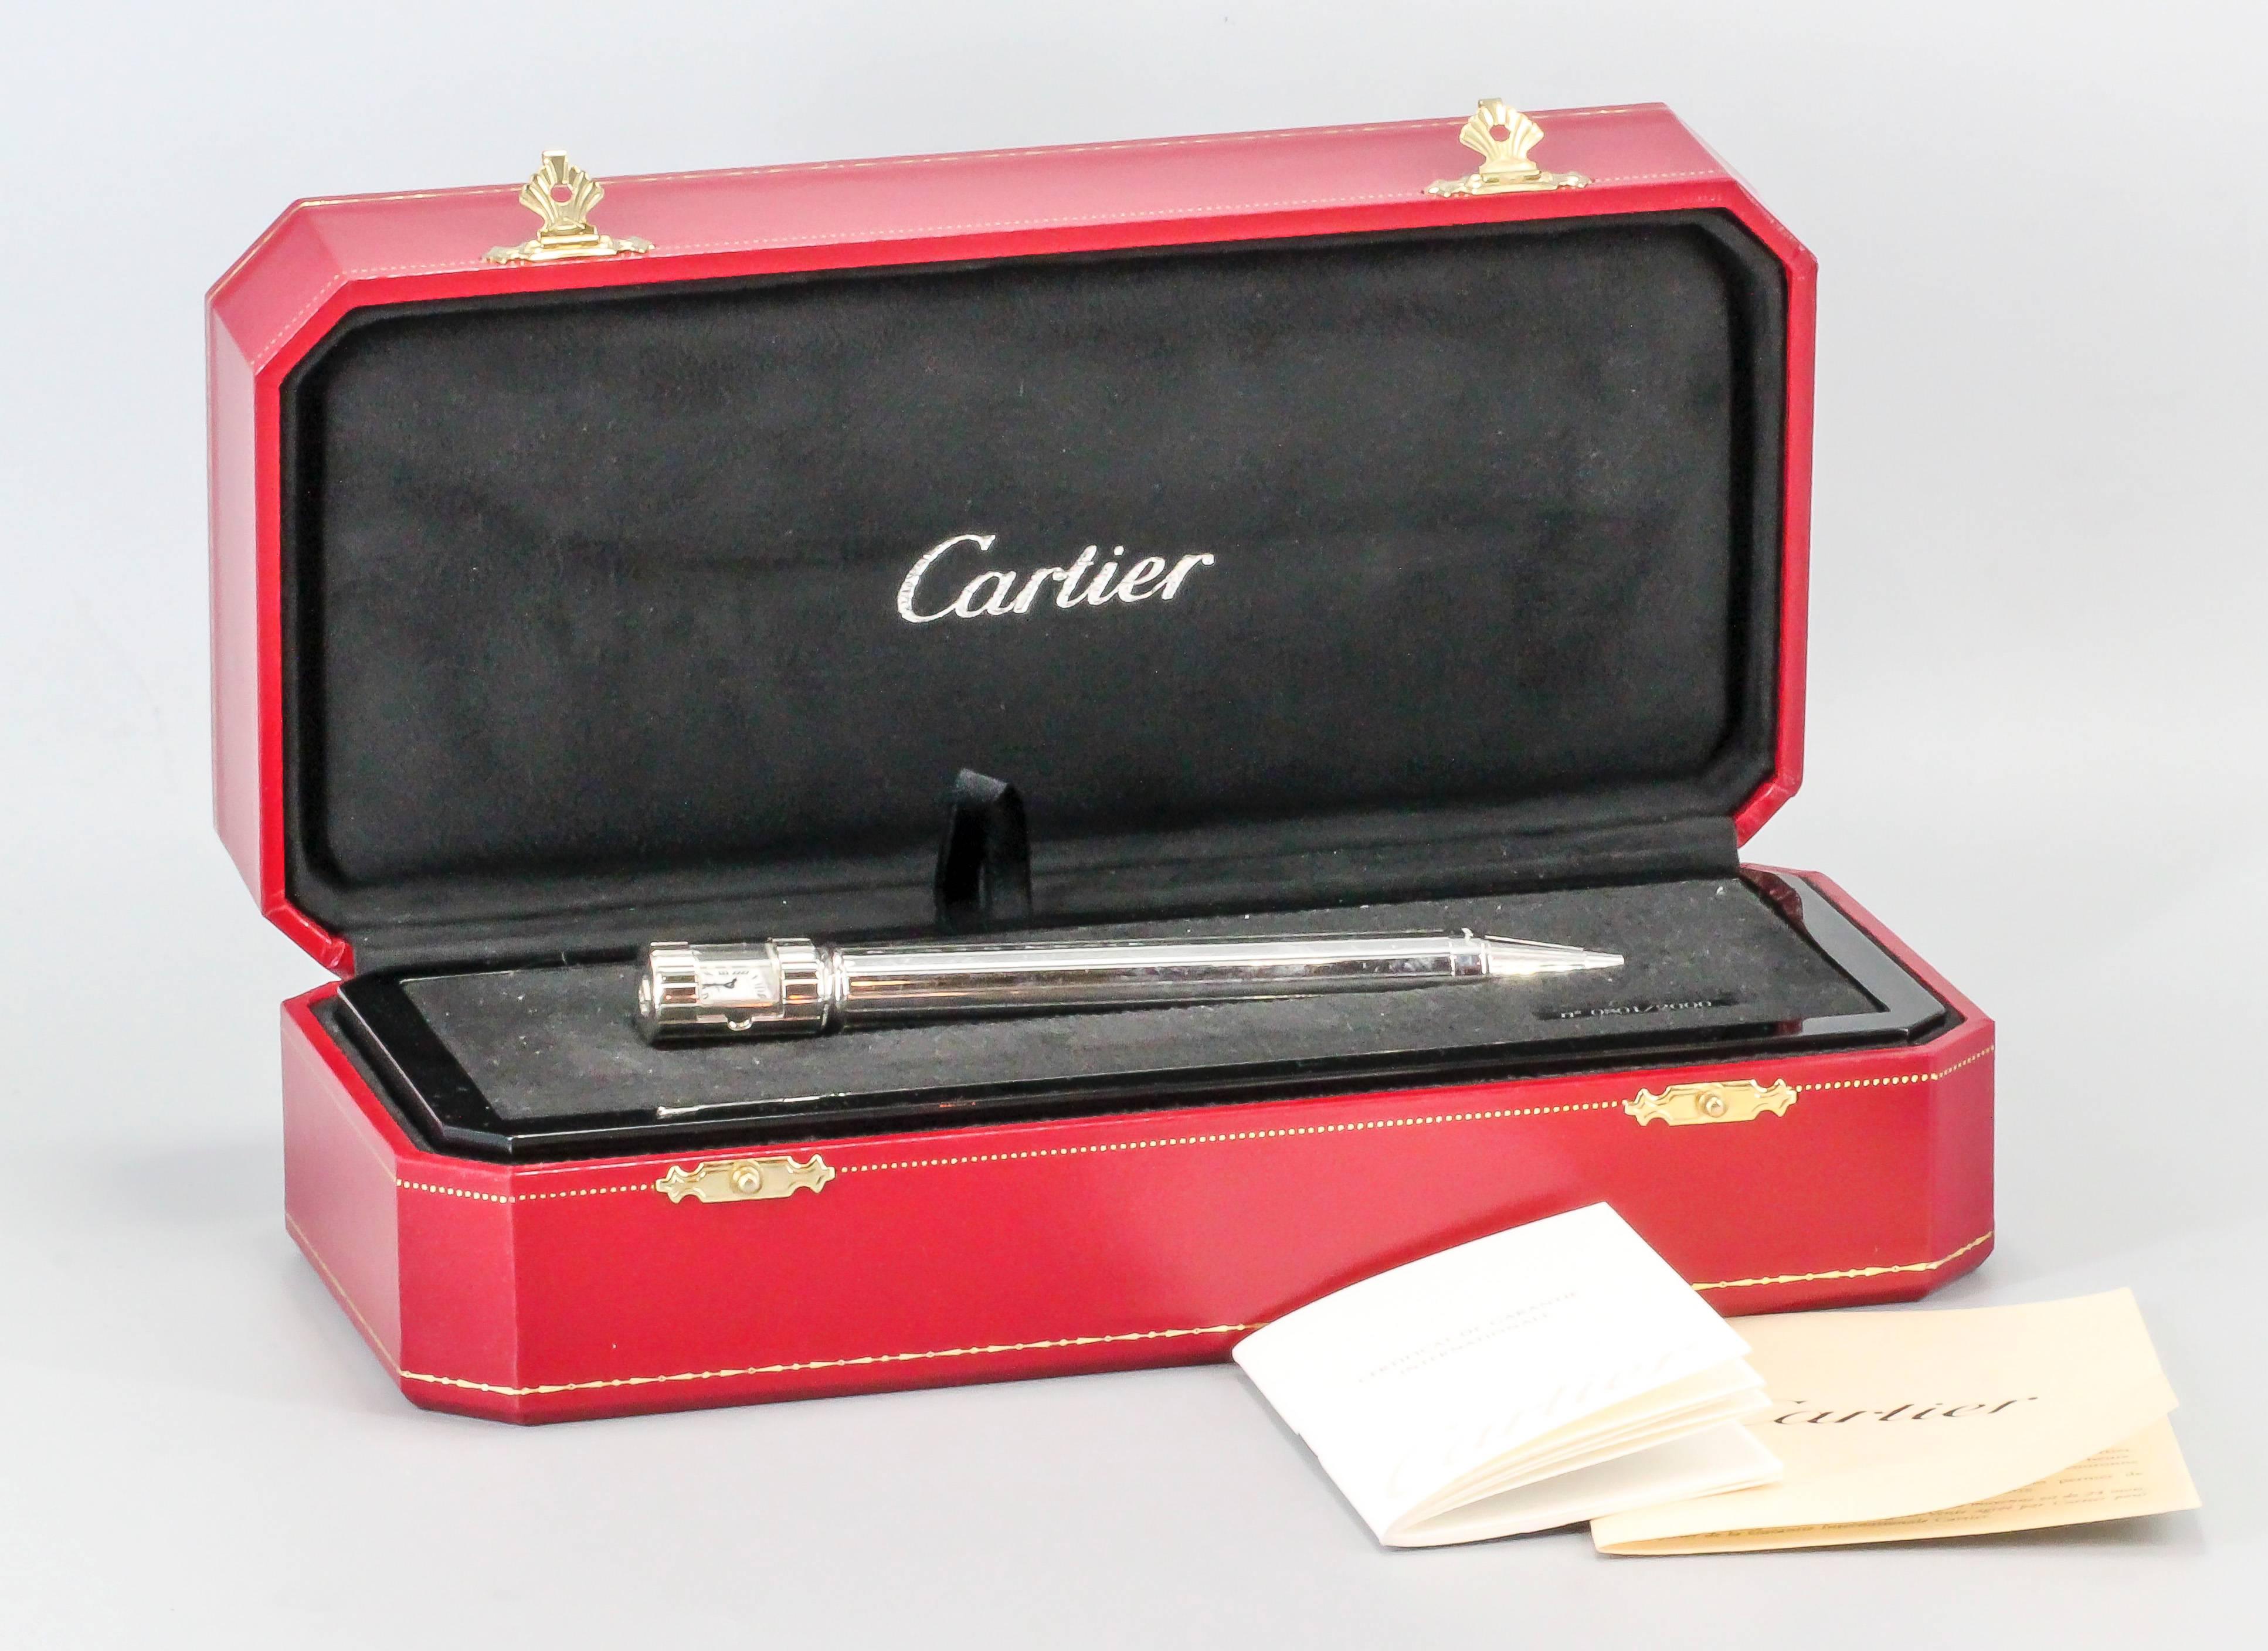 Handsome limited edition (#801 of 2000 made) clock/watch pen by Cartier. It features a twist action ballpoint pen with a small quartz movement watch at the very top, with roman numerals. Watch has a door that can conceal it when twisted. Comes with